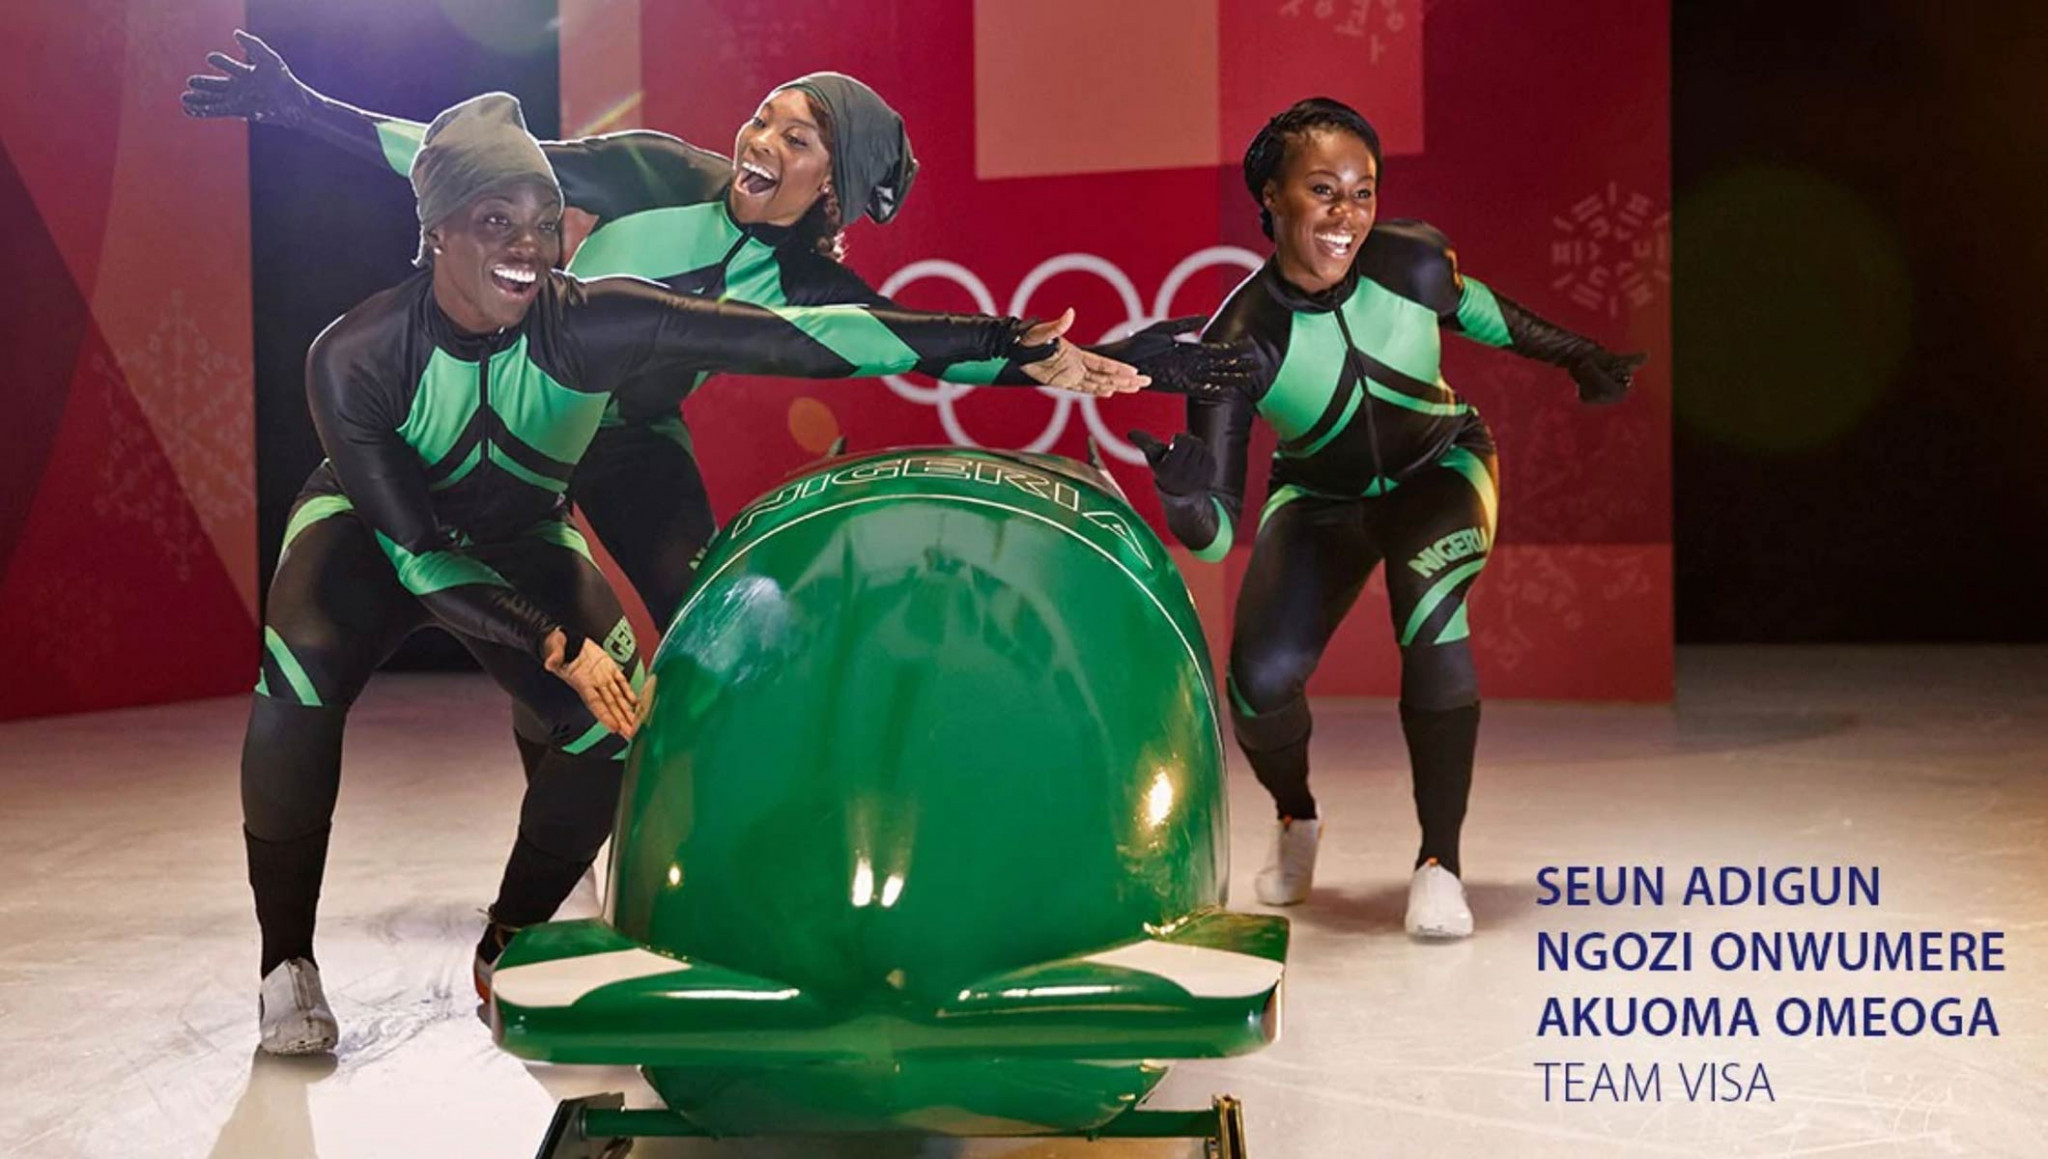 The Nigerian women's bobsleigh team have joined Team Visa in a bid to qualify for Pyeongchang 2018 ©IOC